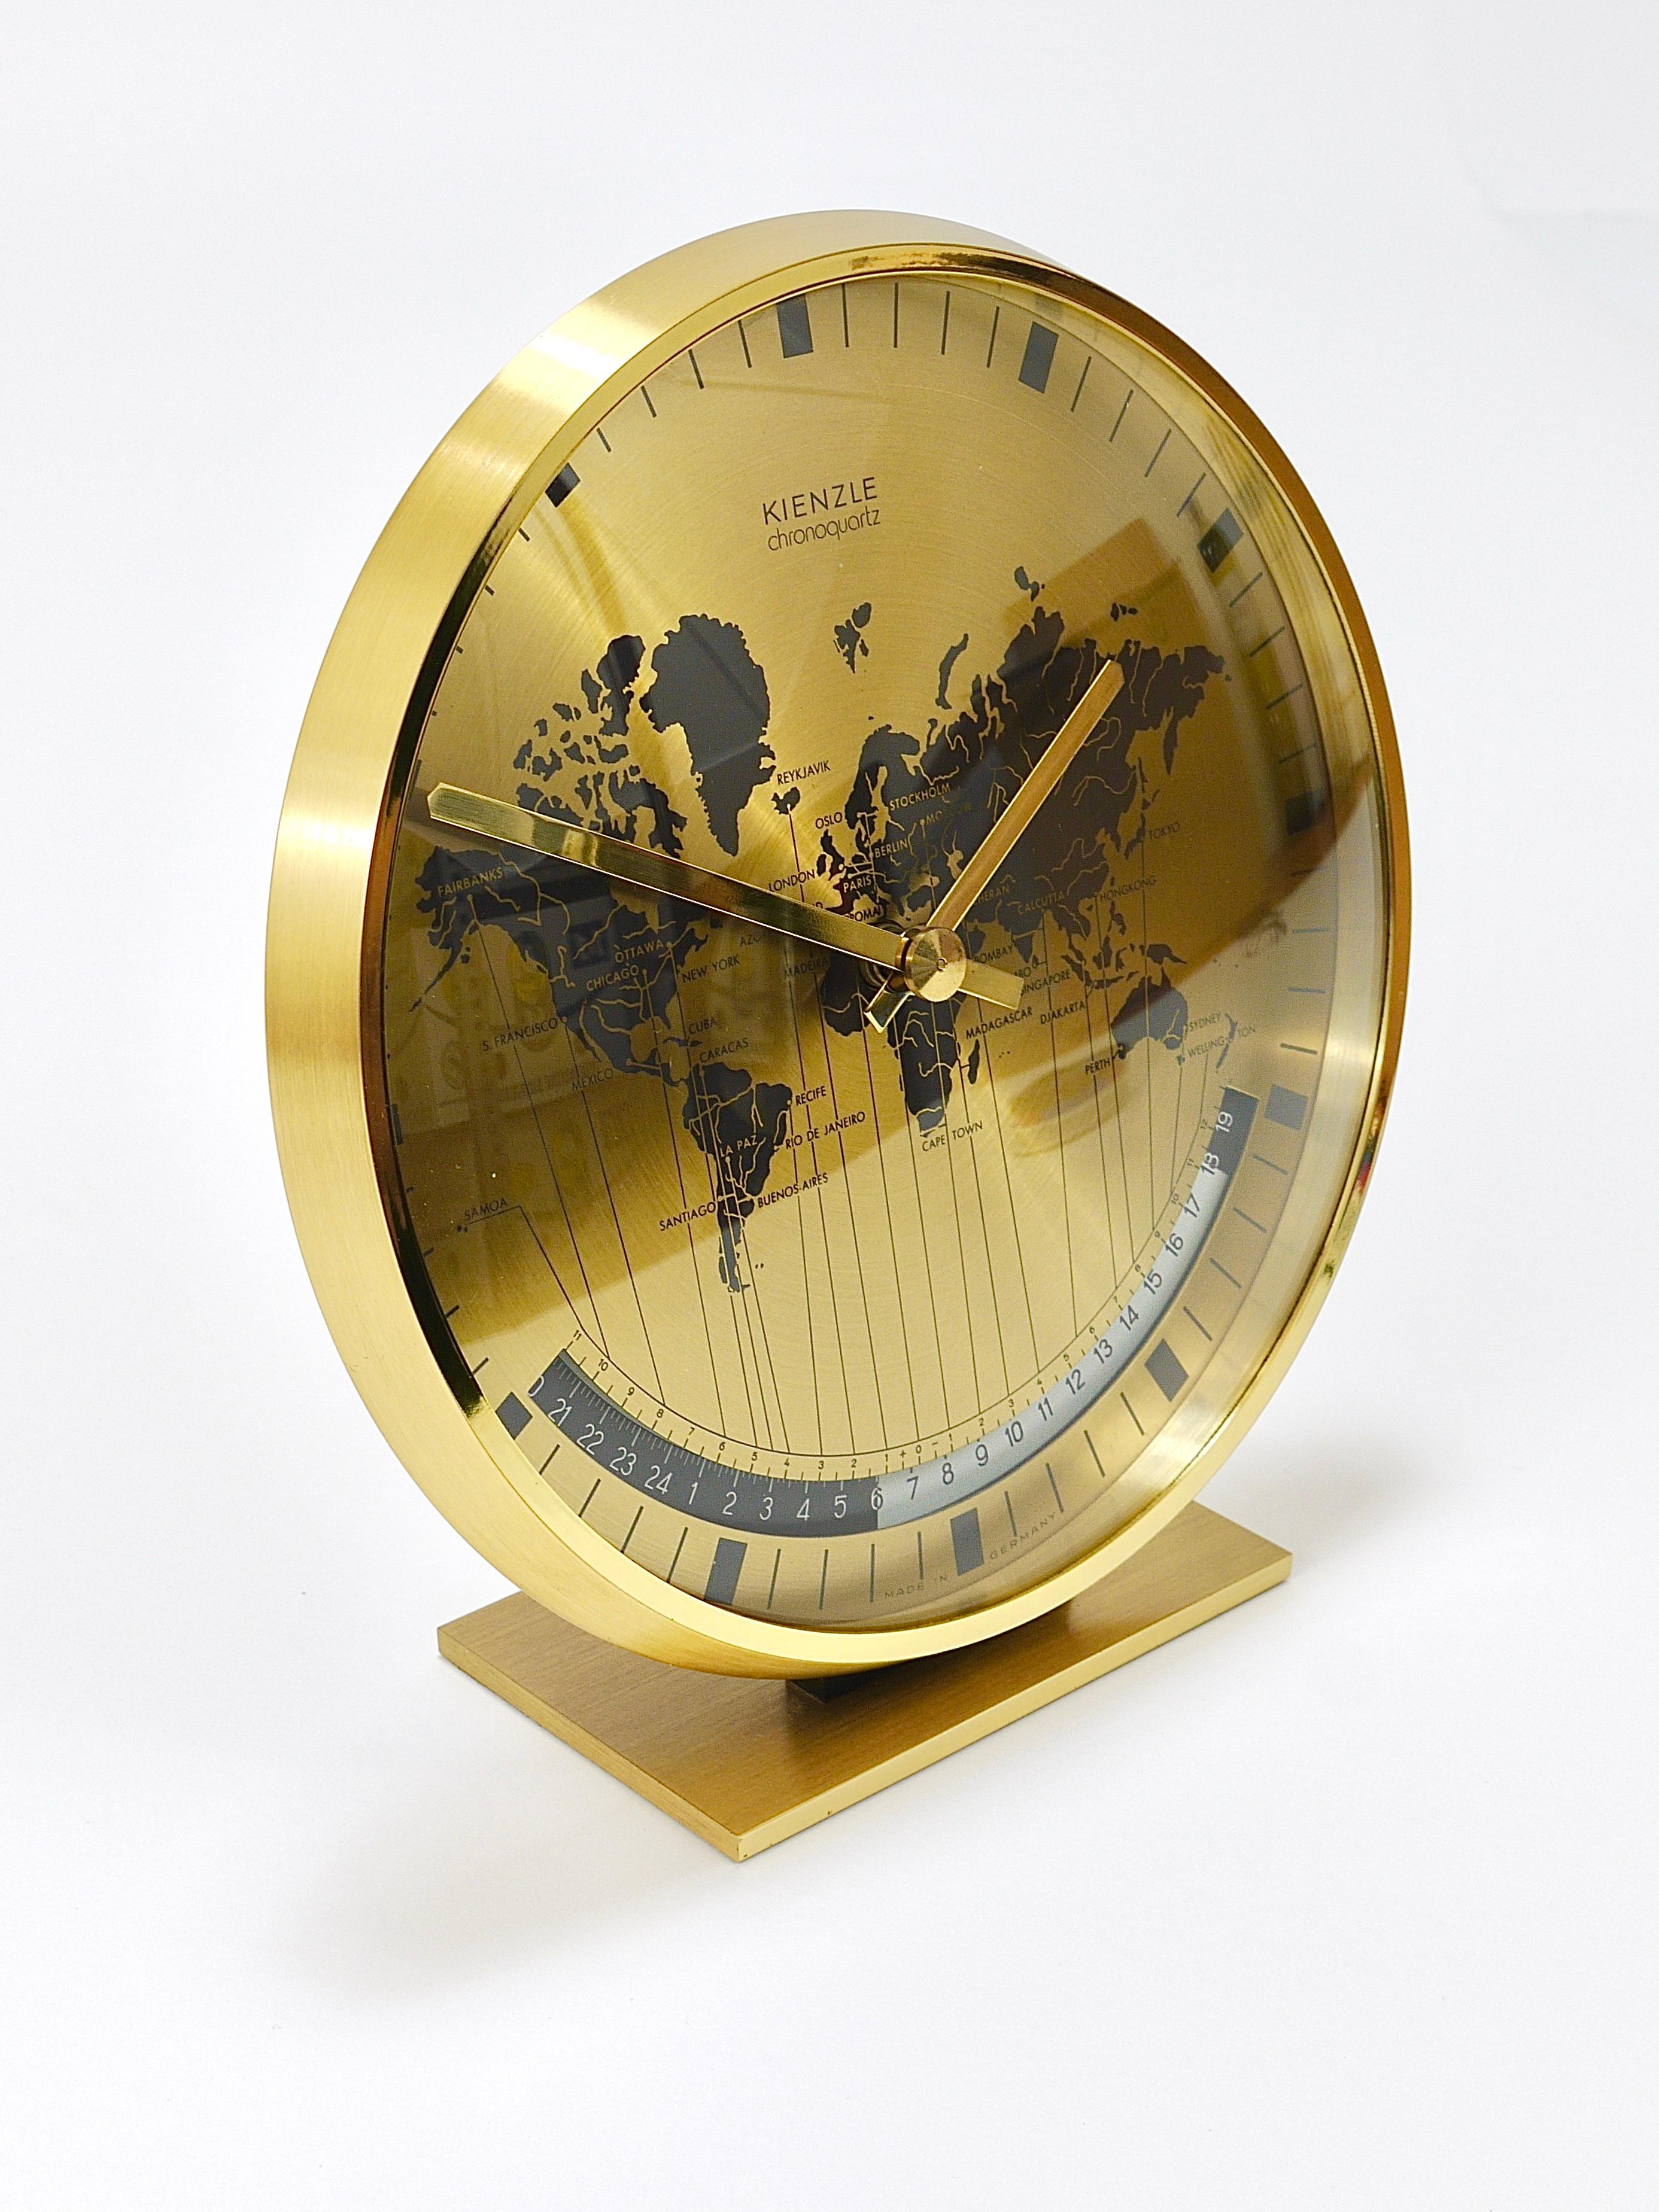 Kienzle GMT World Time Zone Brass Table Clock, Midcentury, Germany, 1960s For Sale 10